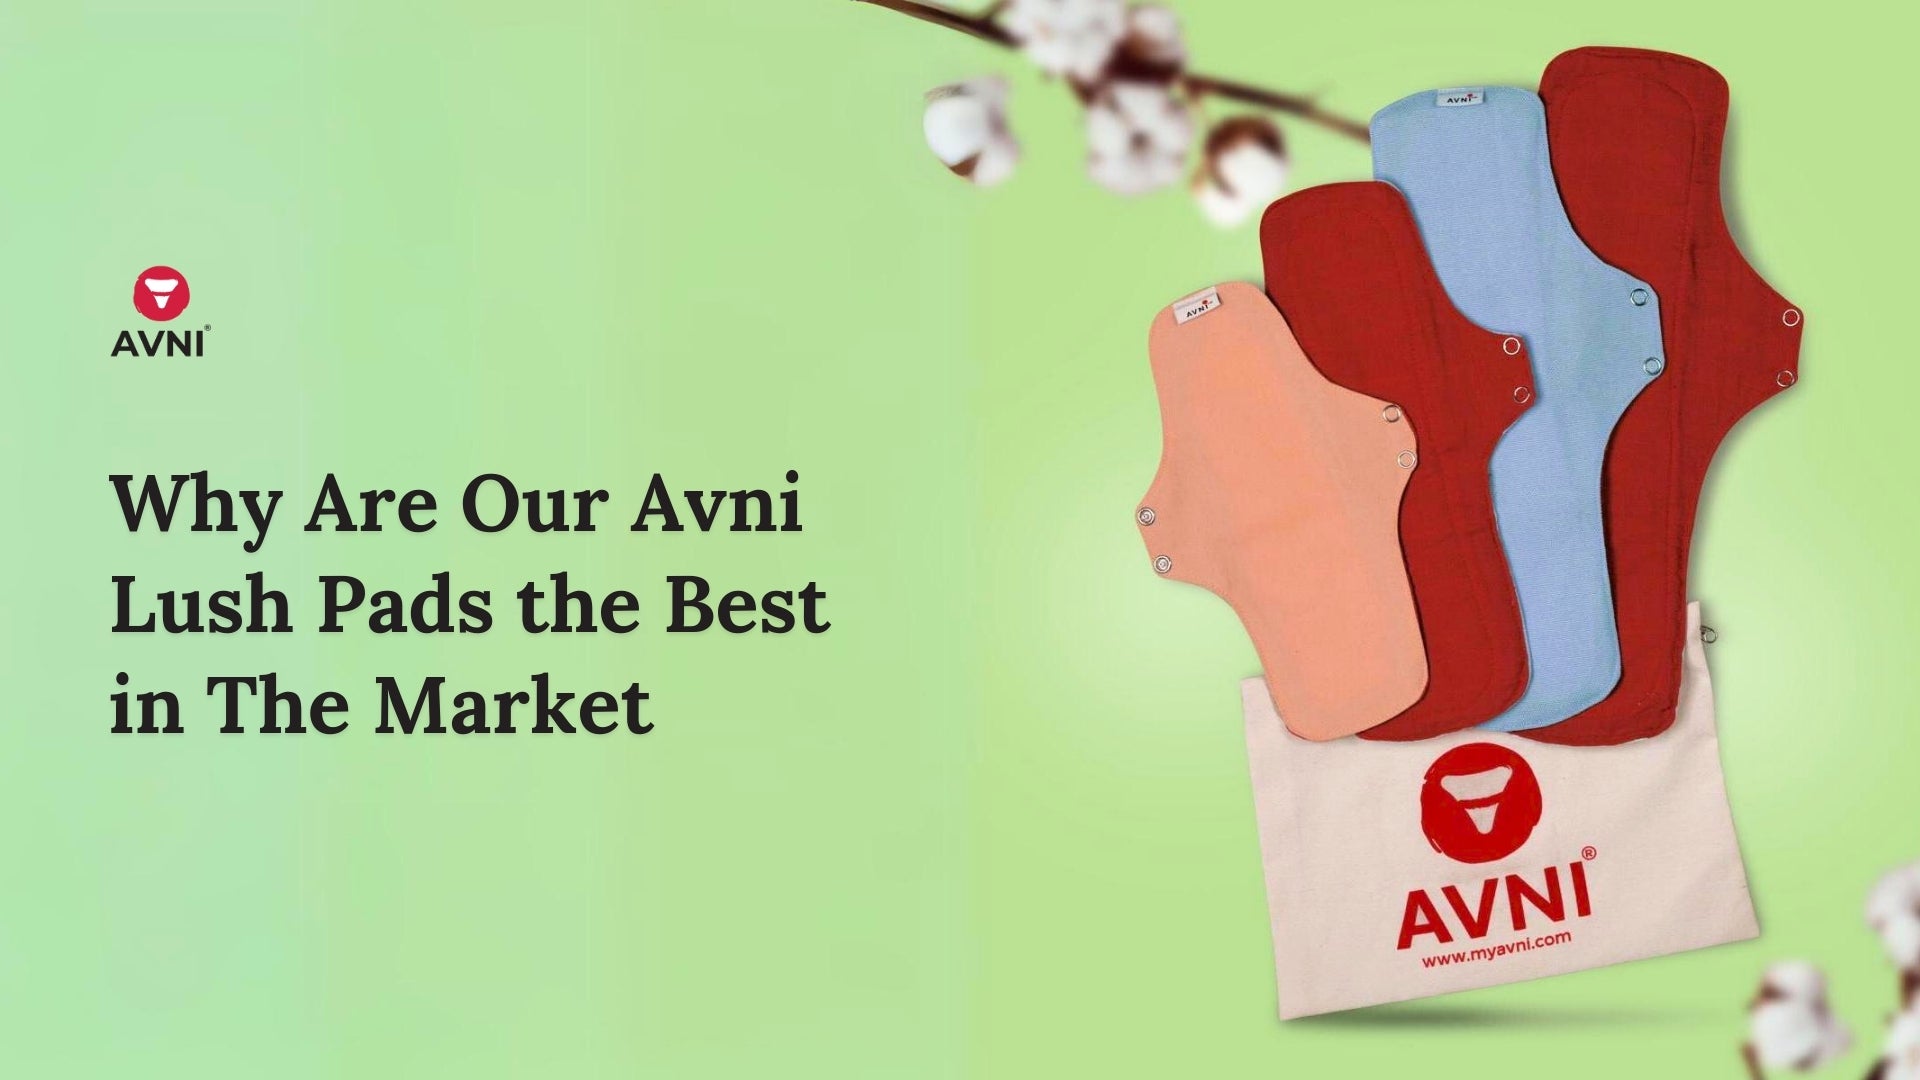 http://www.myavni.com/cdn/shop/articles/Why_Are_Our_Avni_Lush_Pads_the_Best_in_The_Market.jpg?v=1704308757&width=2048